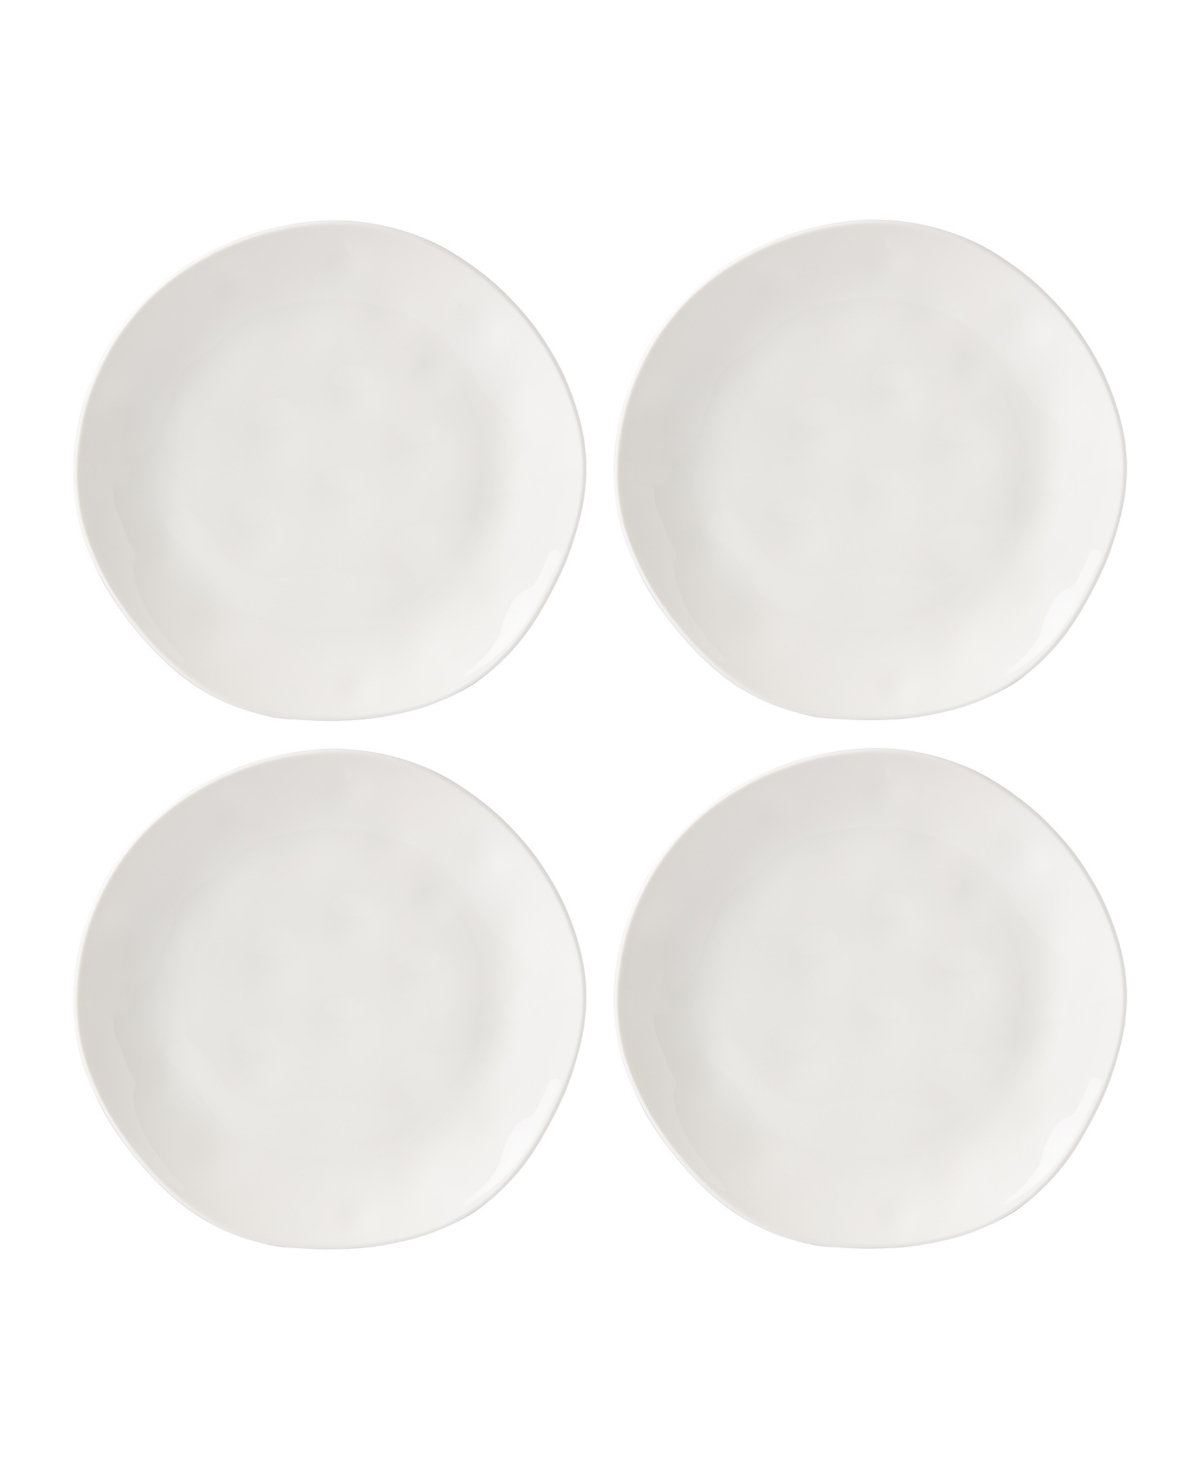 LENOX BAY COLORS SOLID 4 PIECE DINNER PLATE SET, SERVICE FOR 4